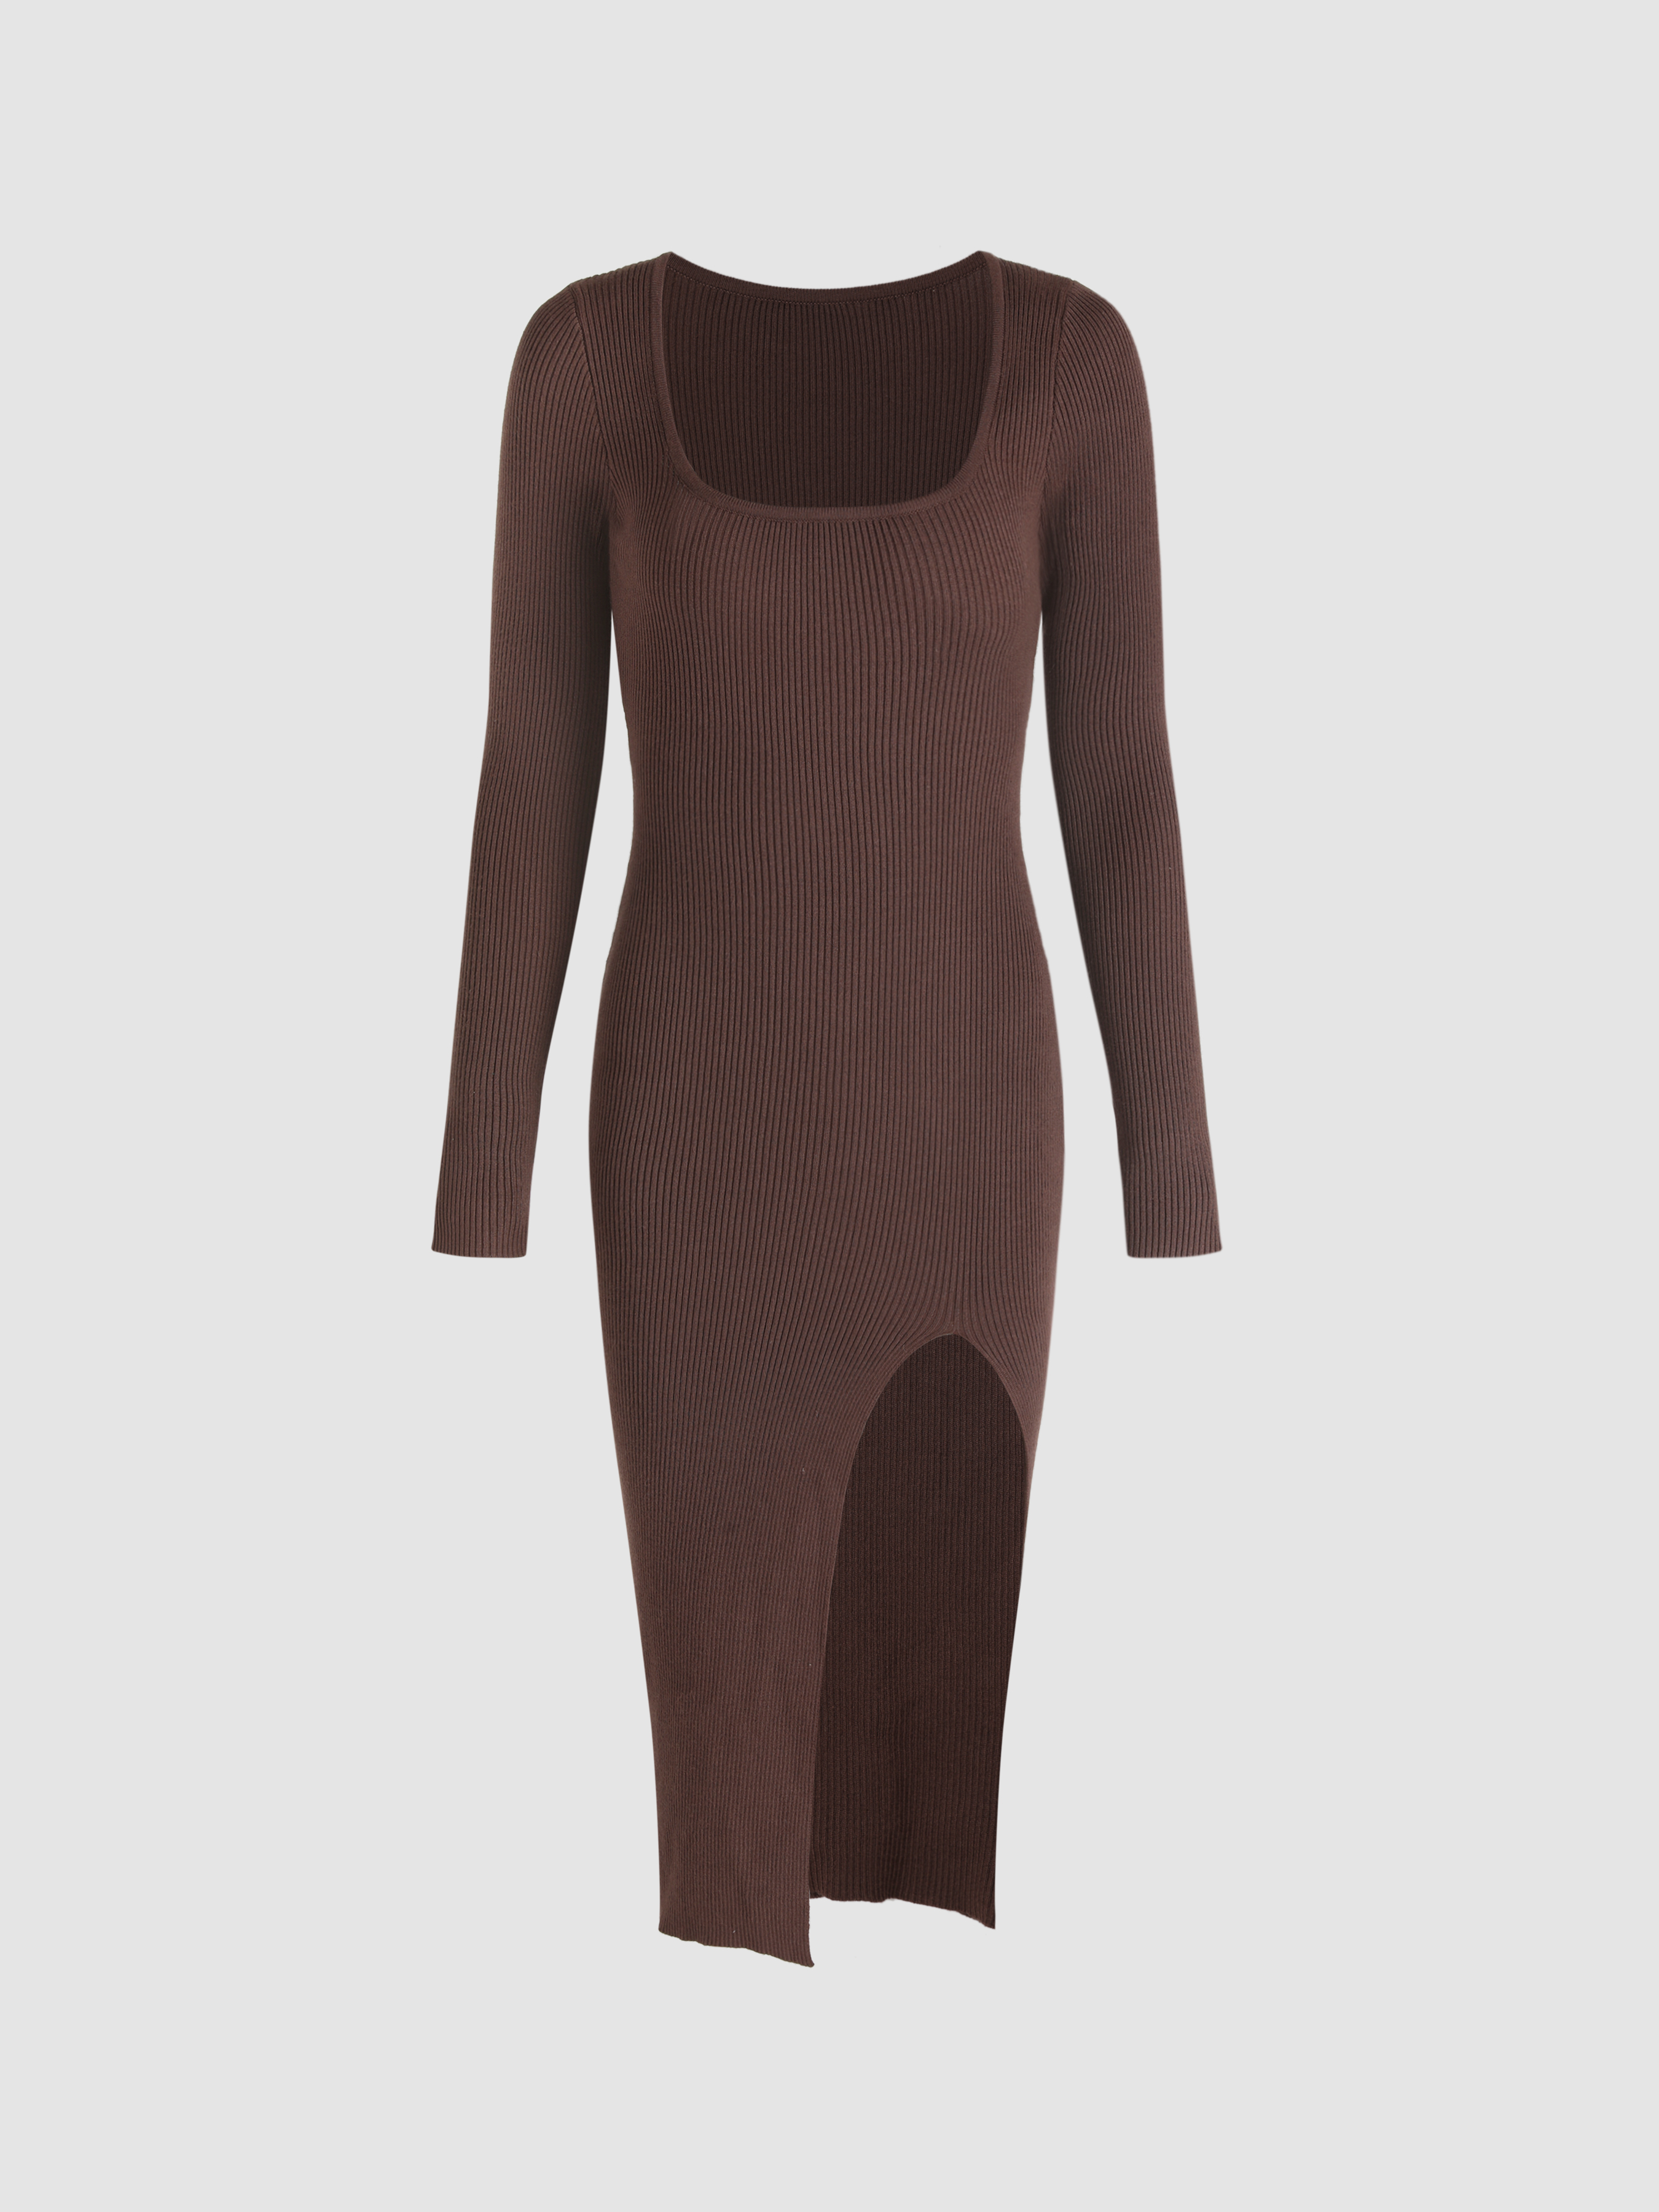 Knit Solid Bodycon Dress - Cider